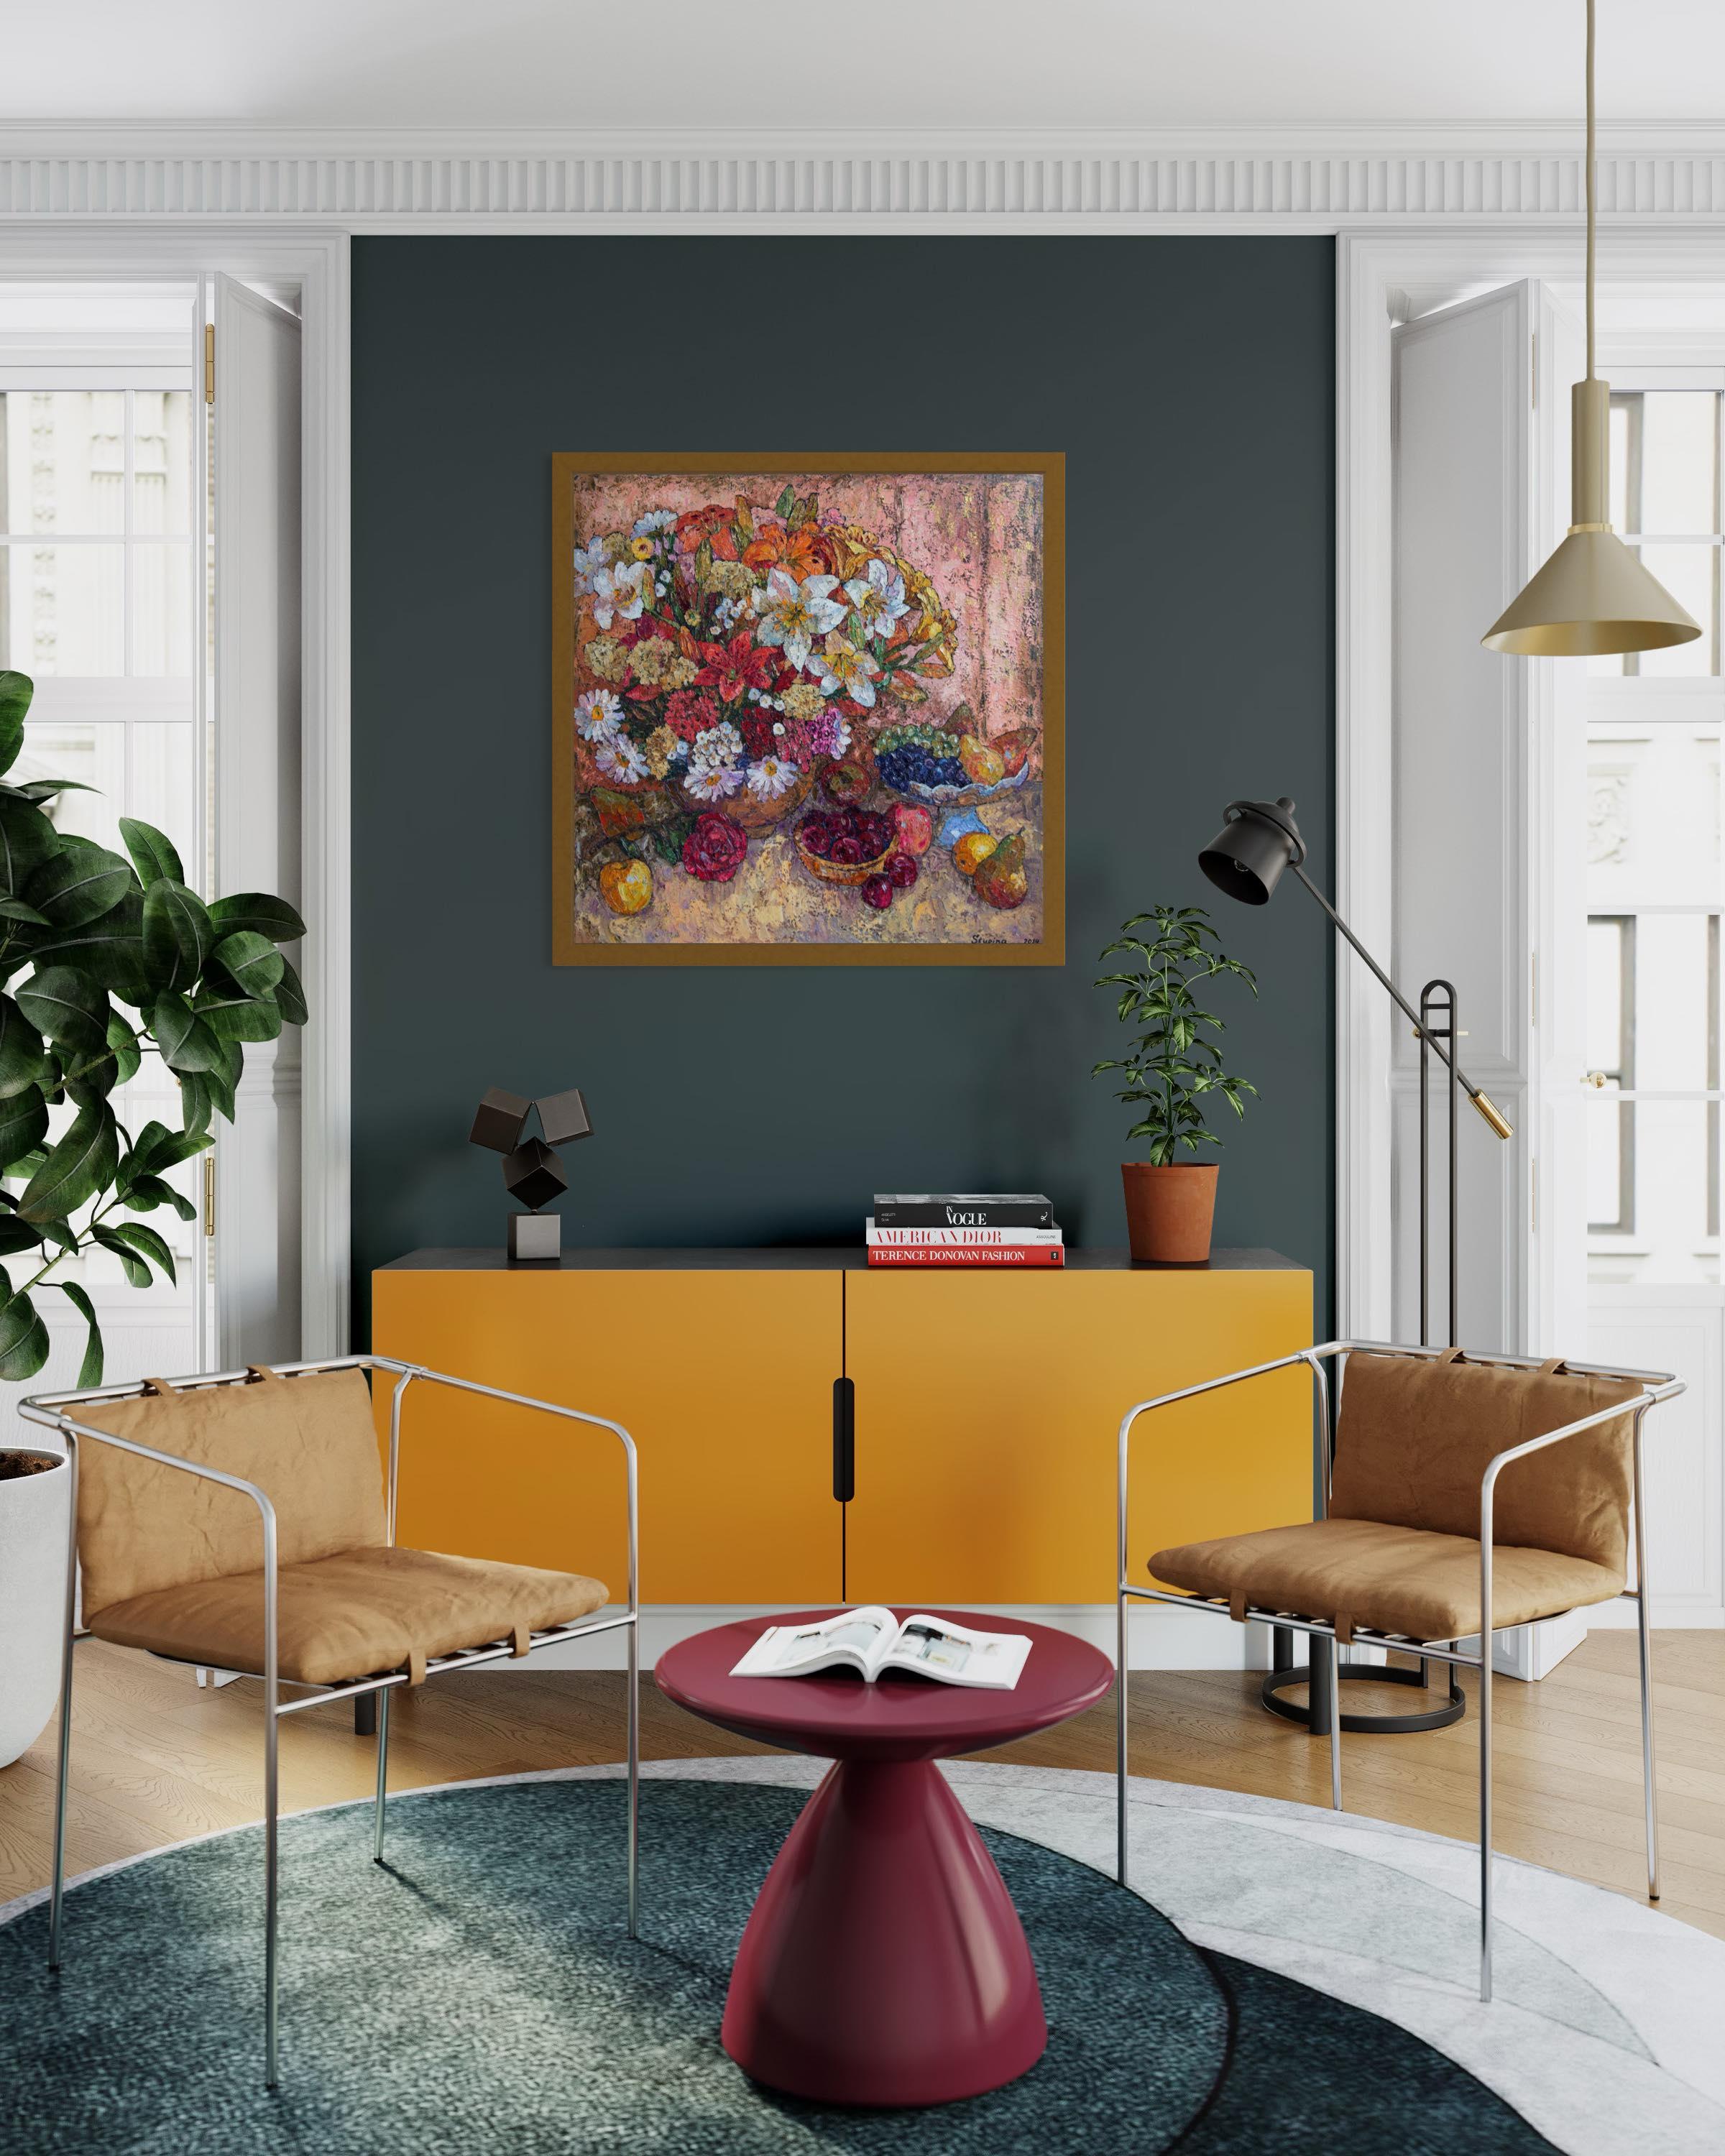 Creating this piece, I immersed myself in the fusion of impressionism and fine art, using oils to birth vibrant lilies and lush fruits. Every brushstroke embodies vitality, manifesting a symphony of colors and textures that dance across the canvas.